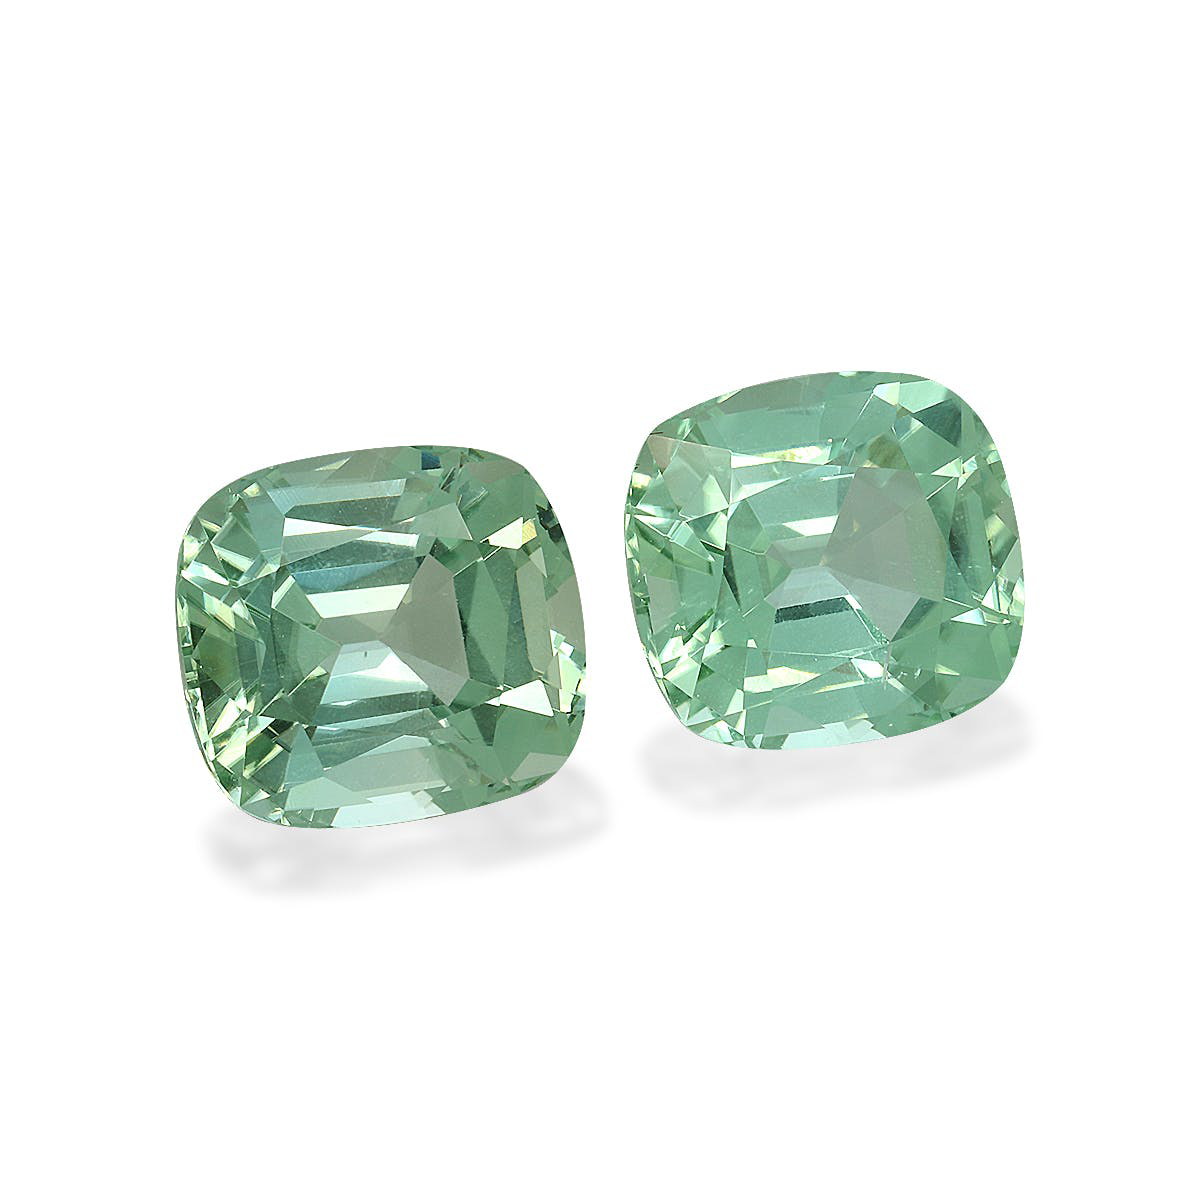 Picture of Mist Green Tourmaline 14.76ct - Pair (TG1366)